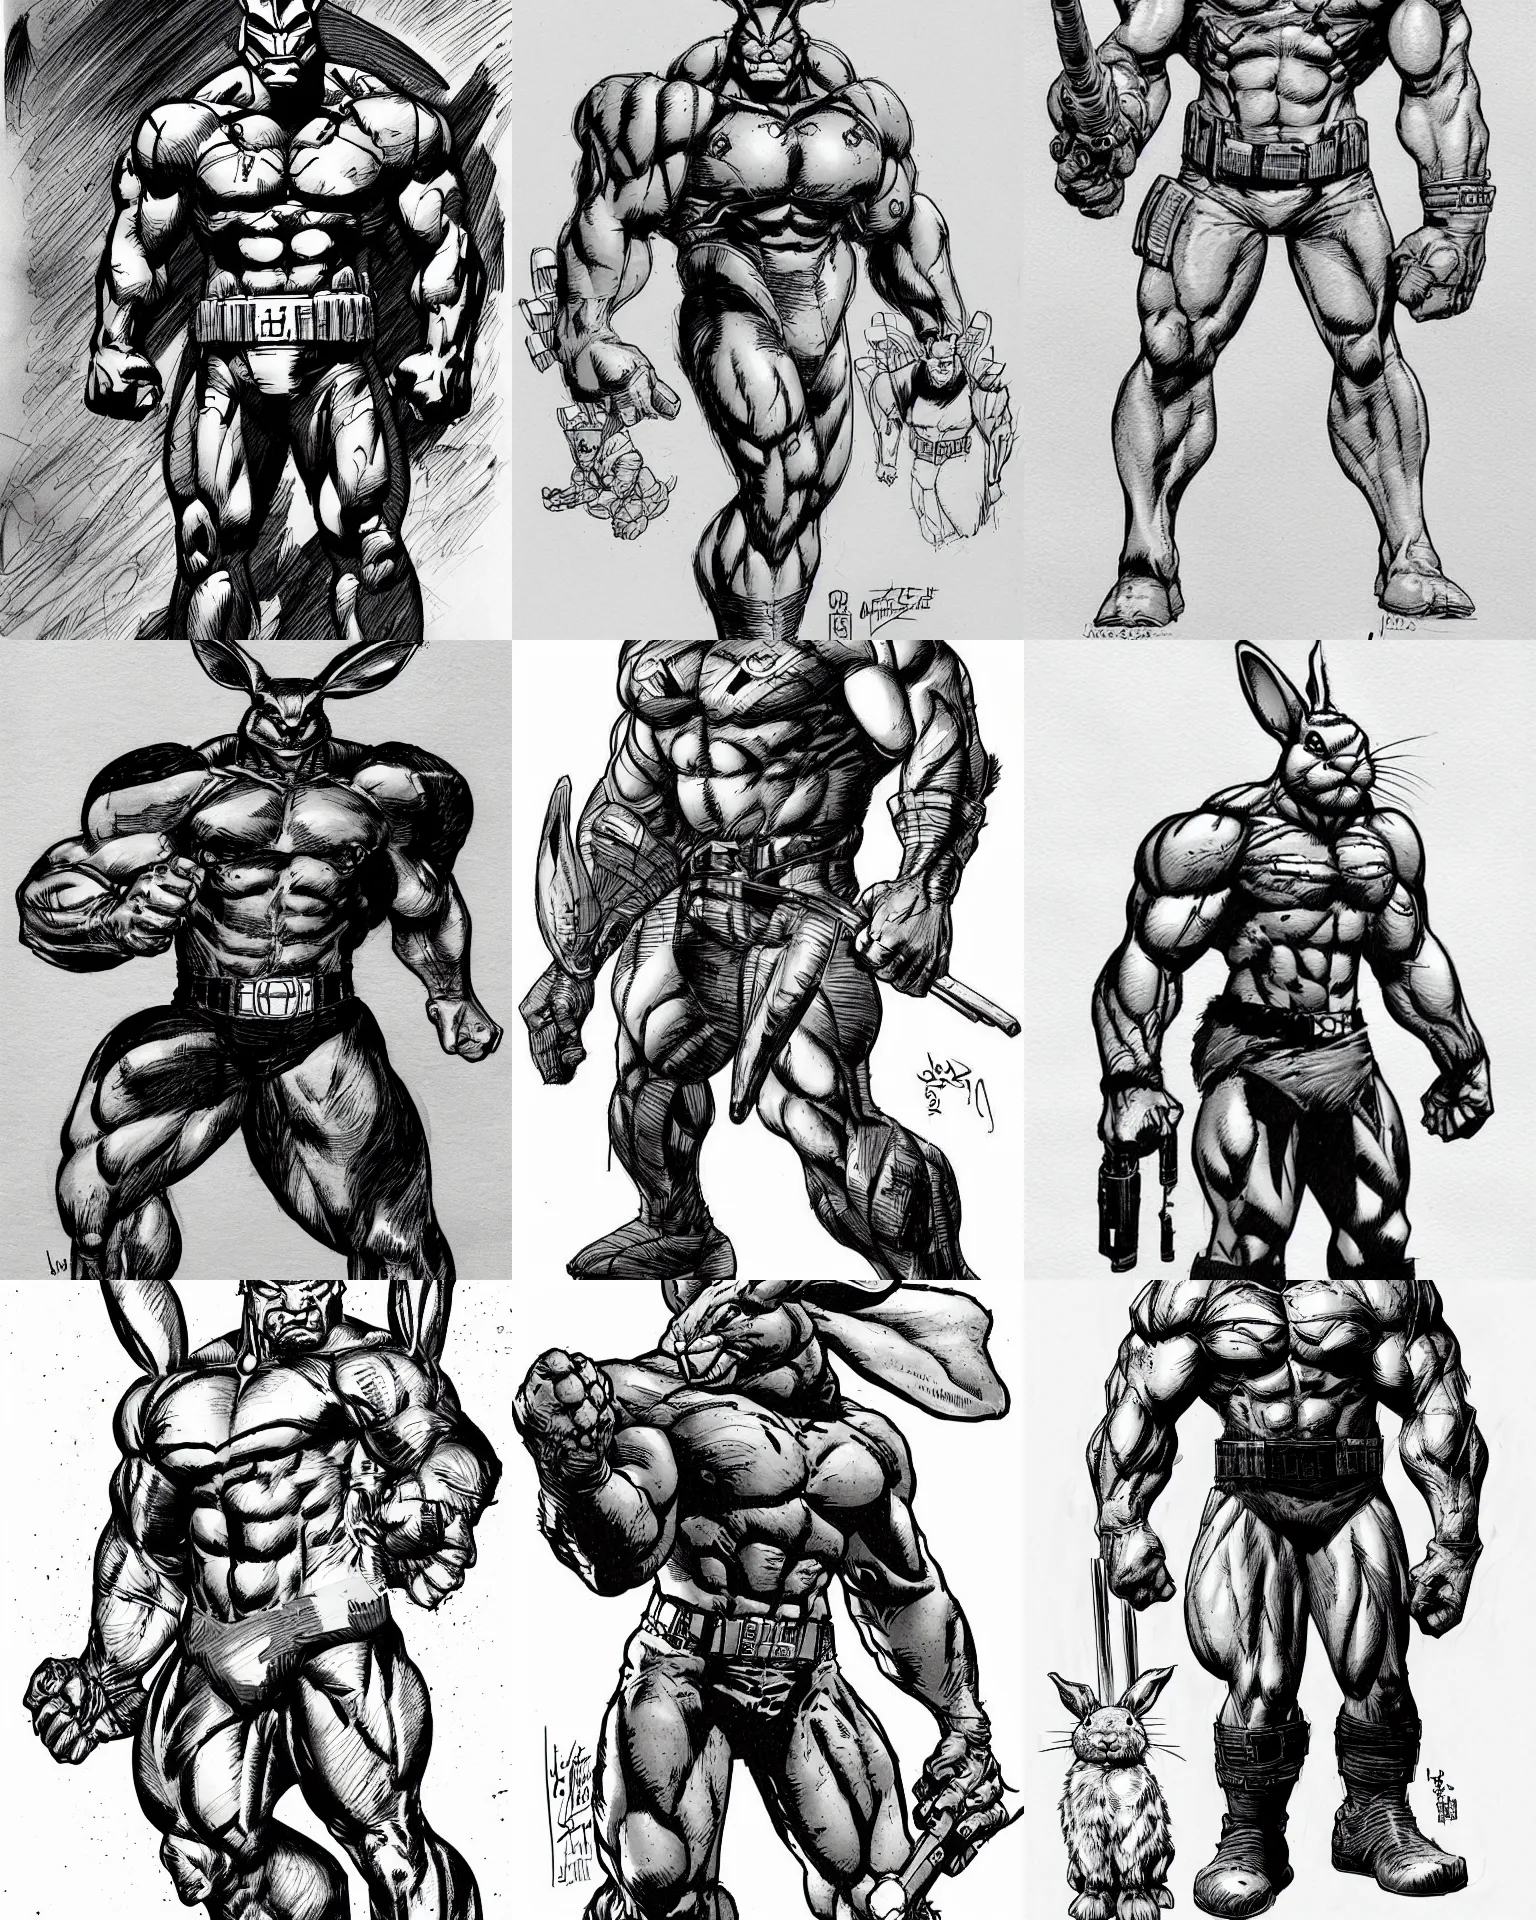 Prompt: rabbit!!! jim lee!!! medium shot!! flat grayscale ink sketch by jim lee close up in the style of jim lee, front lat spread pose swat soldier armor borderlands hulk rabbit animal by jim lee